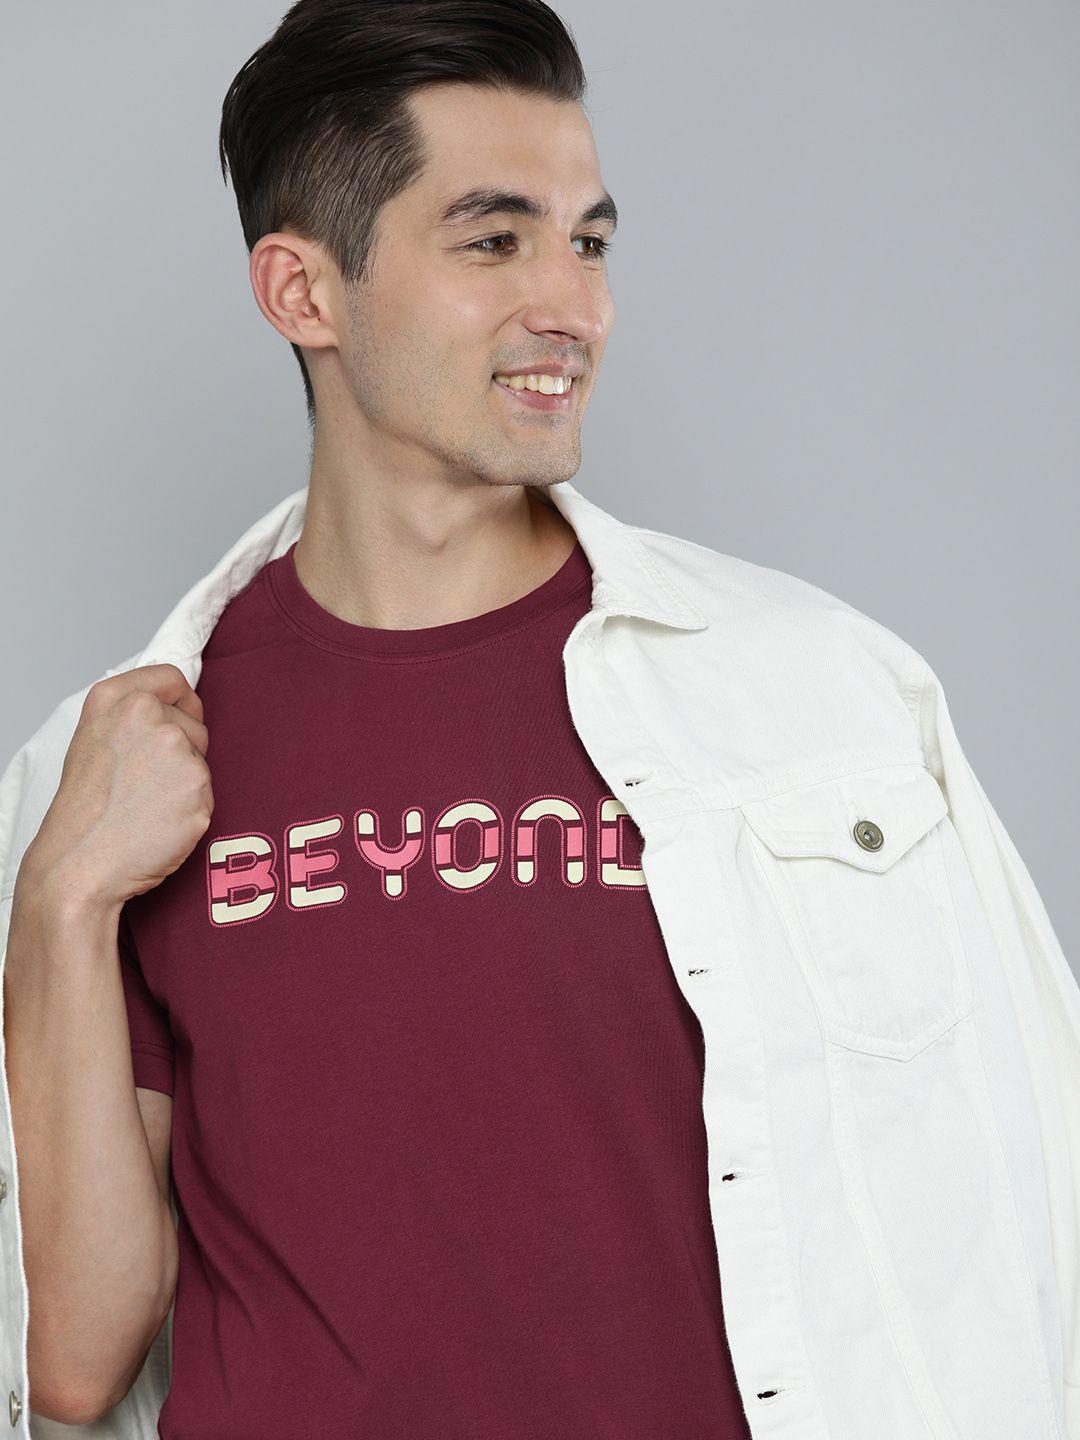 here&now men maroon typography printed pure cotton t-shirt